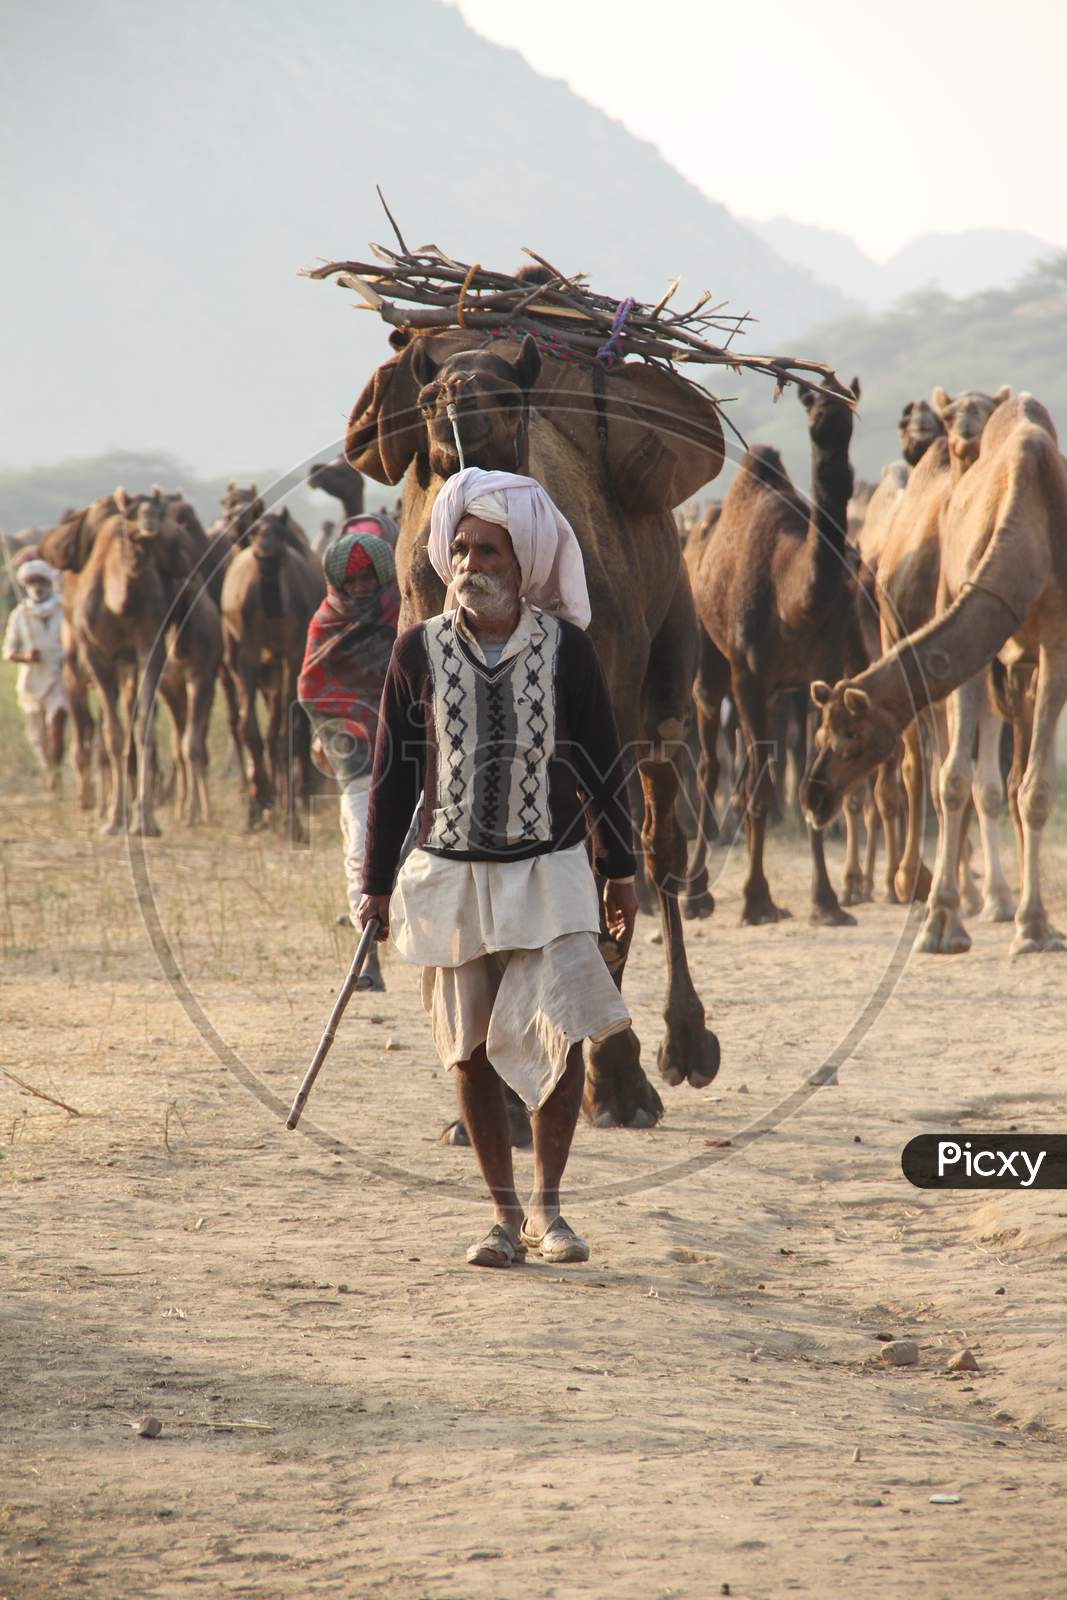 Pushkar Camel Fair In Pushkar In Rajasthan.  Thousands Of Livestock Traders From The Region Come To The Traditional Camel Fair Where Livestock, Mainly Camels, Are Traded. This Annual Five-Day Camel And Livestock Fair Is One Of The World'S Largest Camel Fairs.